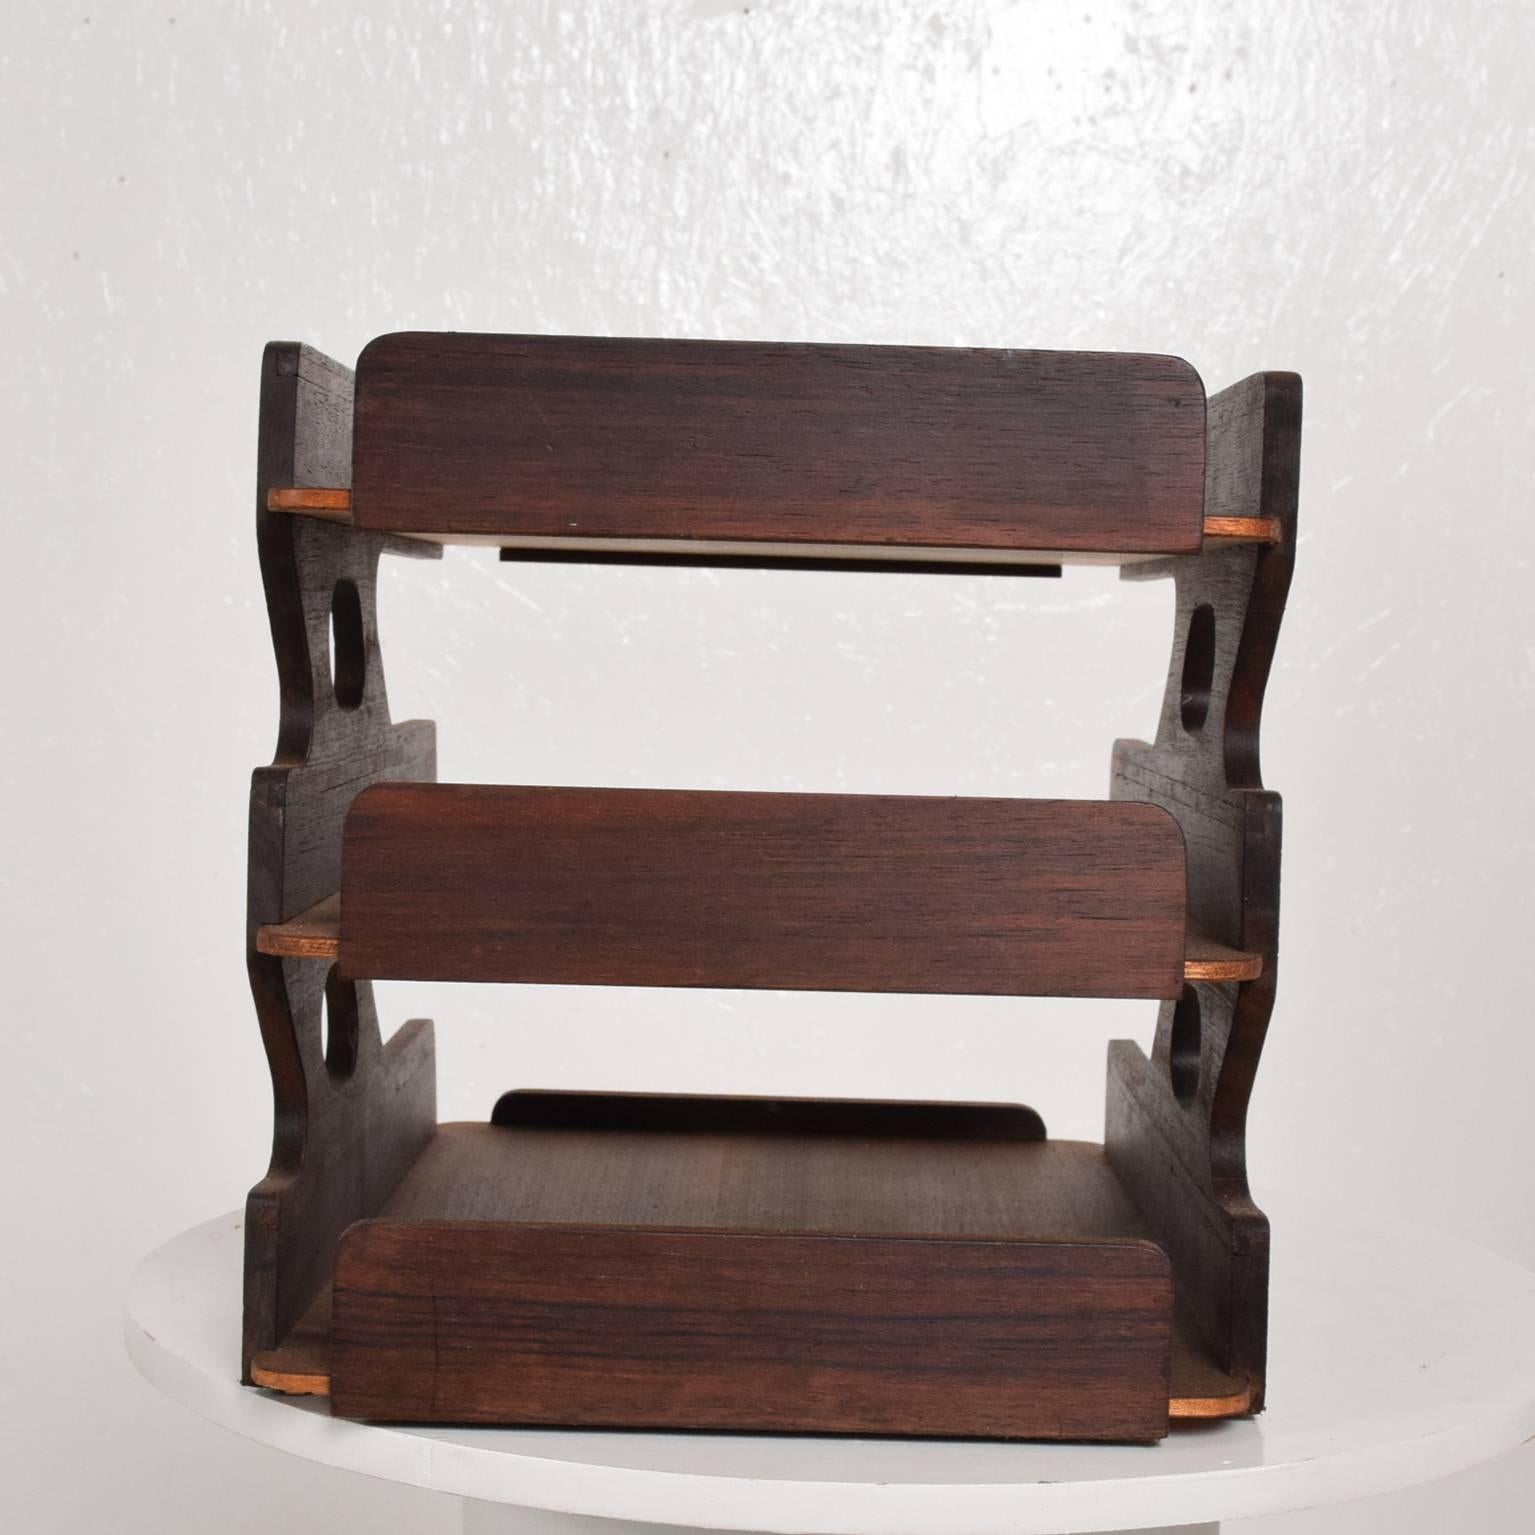 American Miid-Century Modern Rosewood Office Tray Desk Accessory